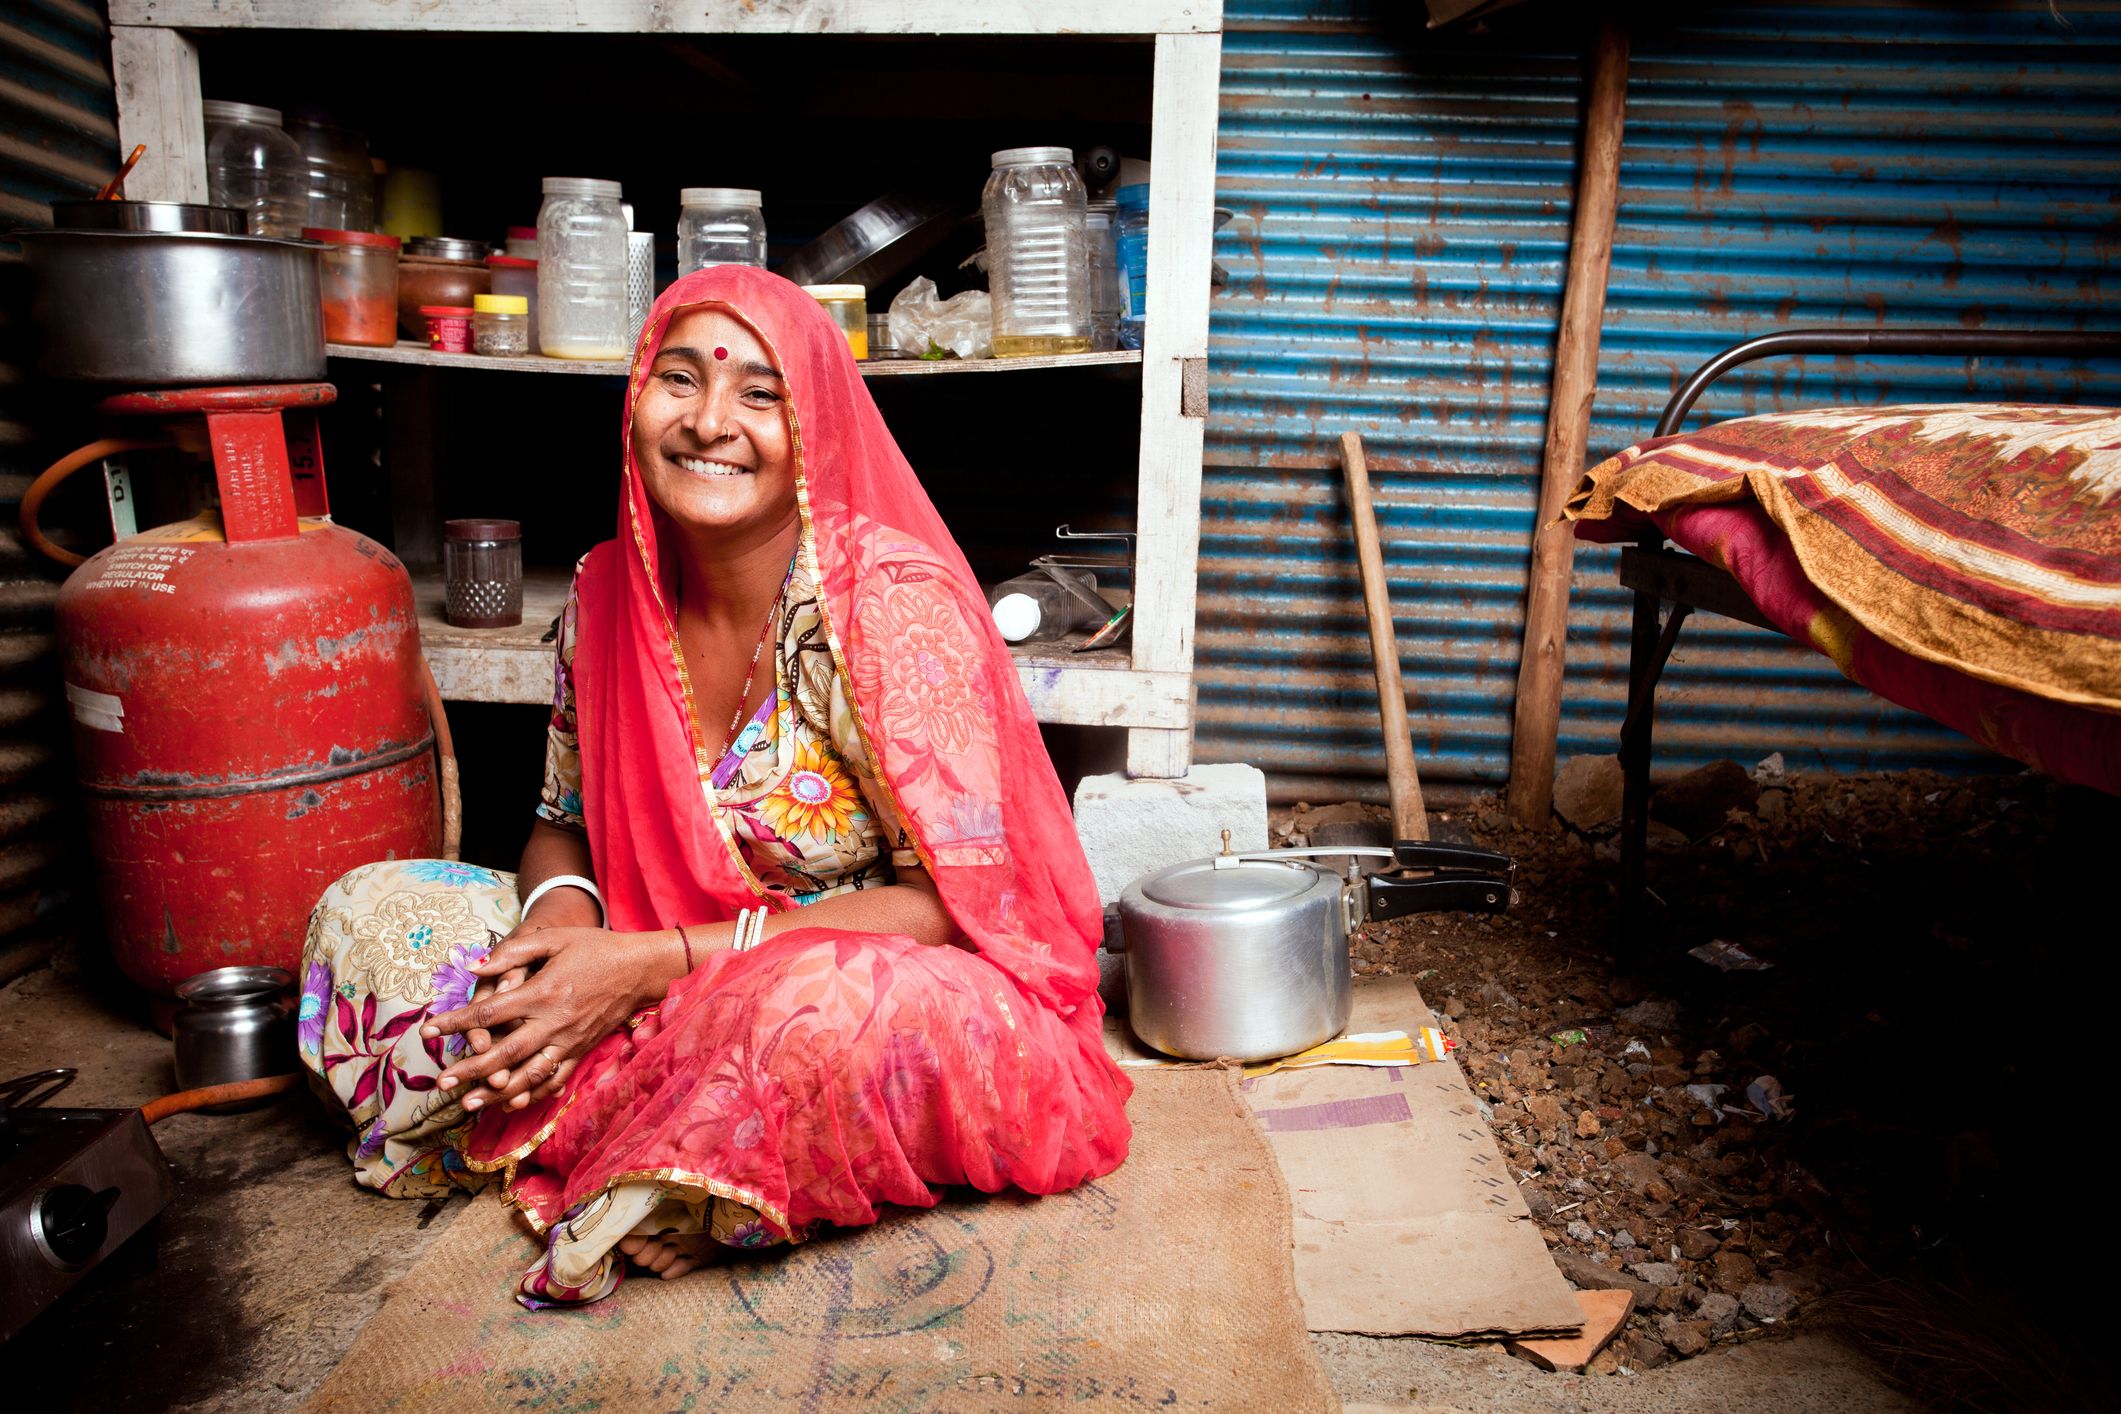 Woman smiling next to cooking stove